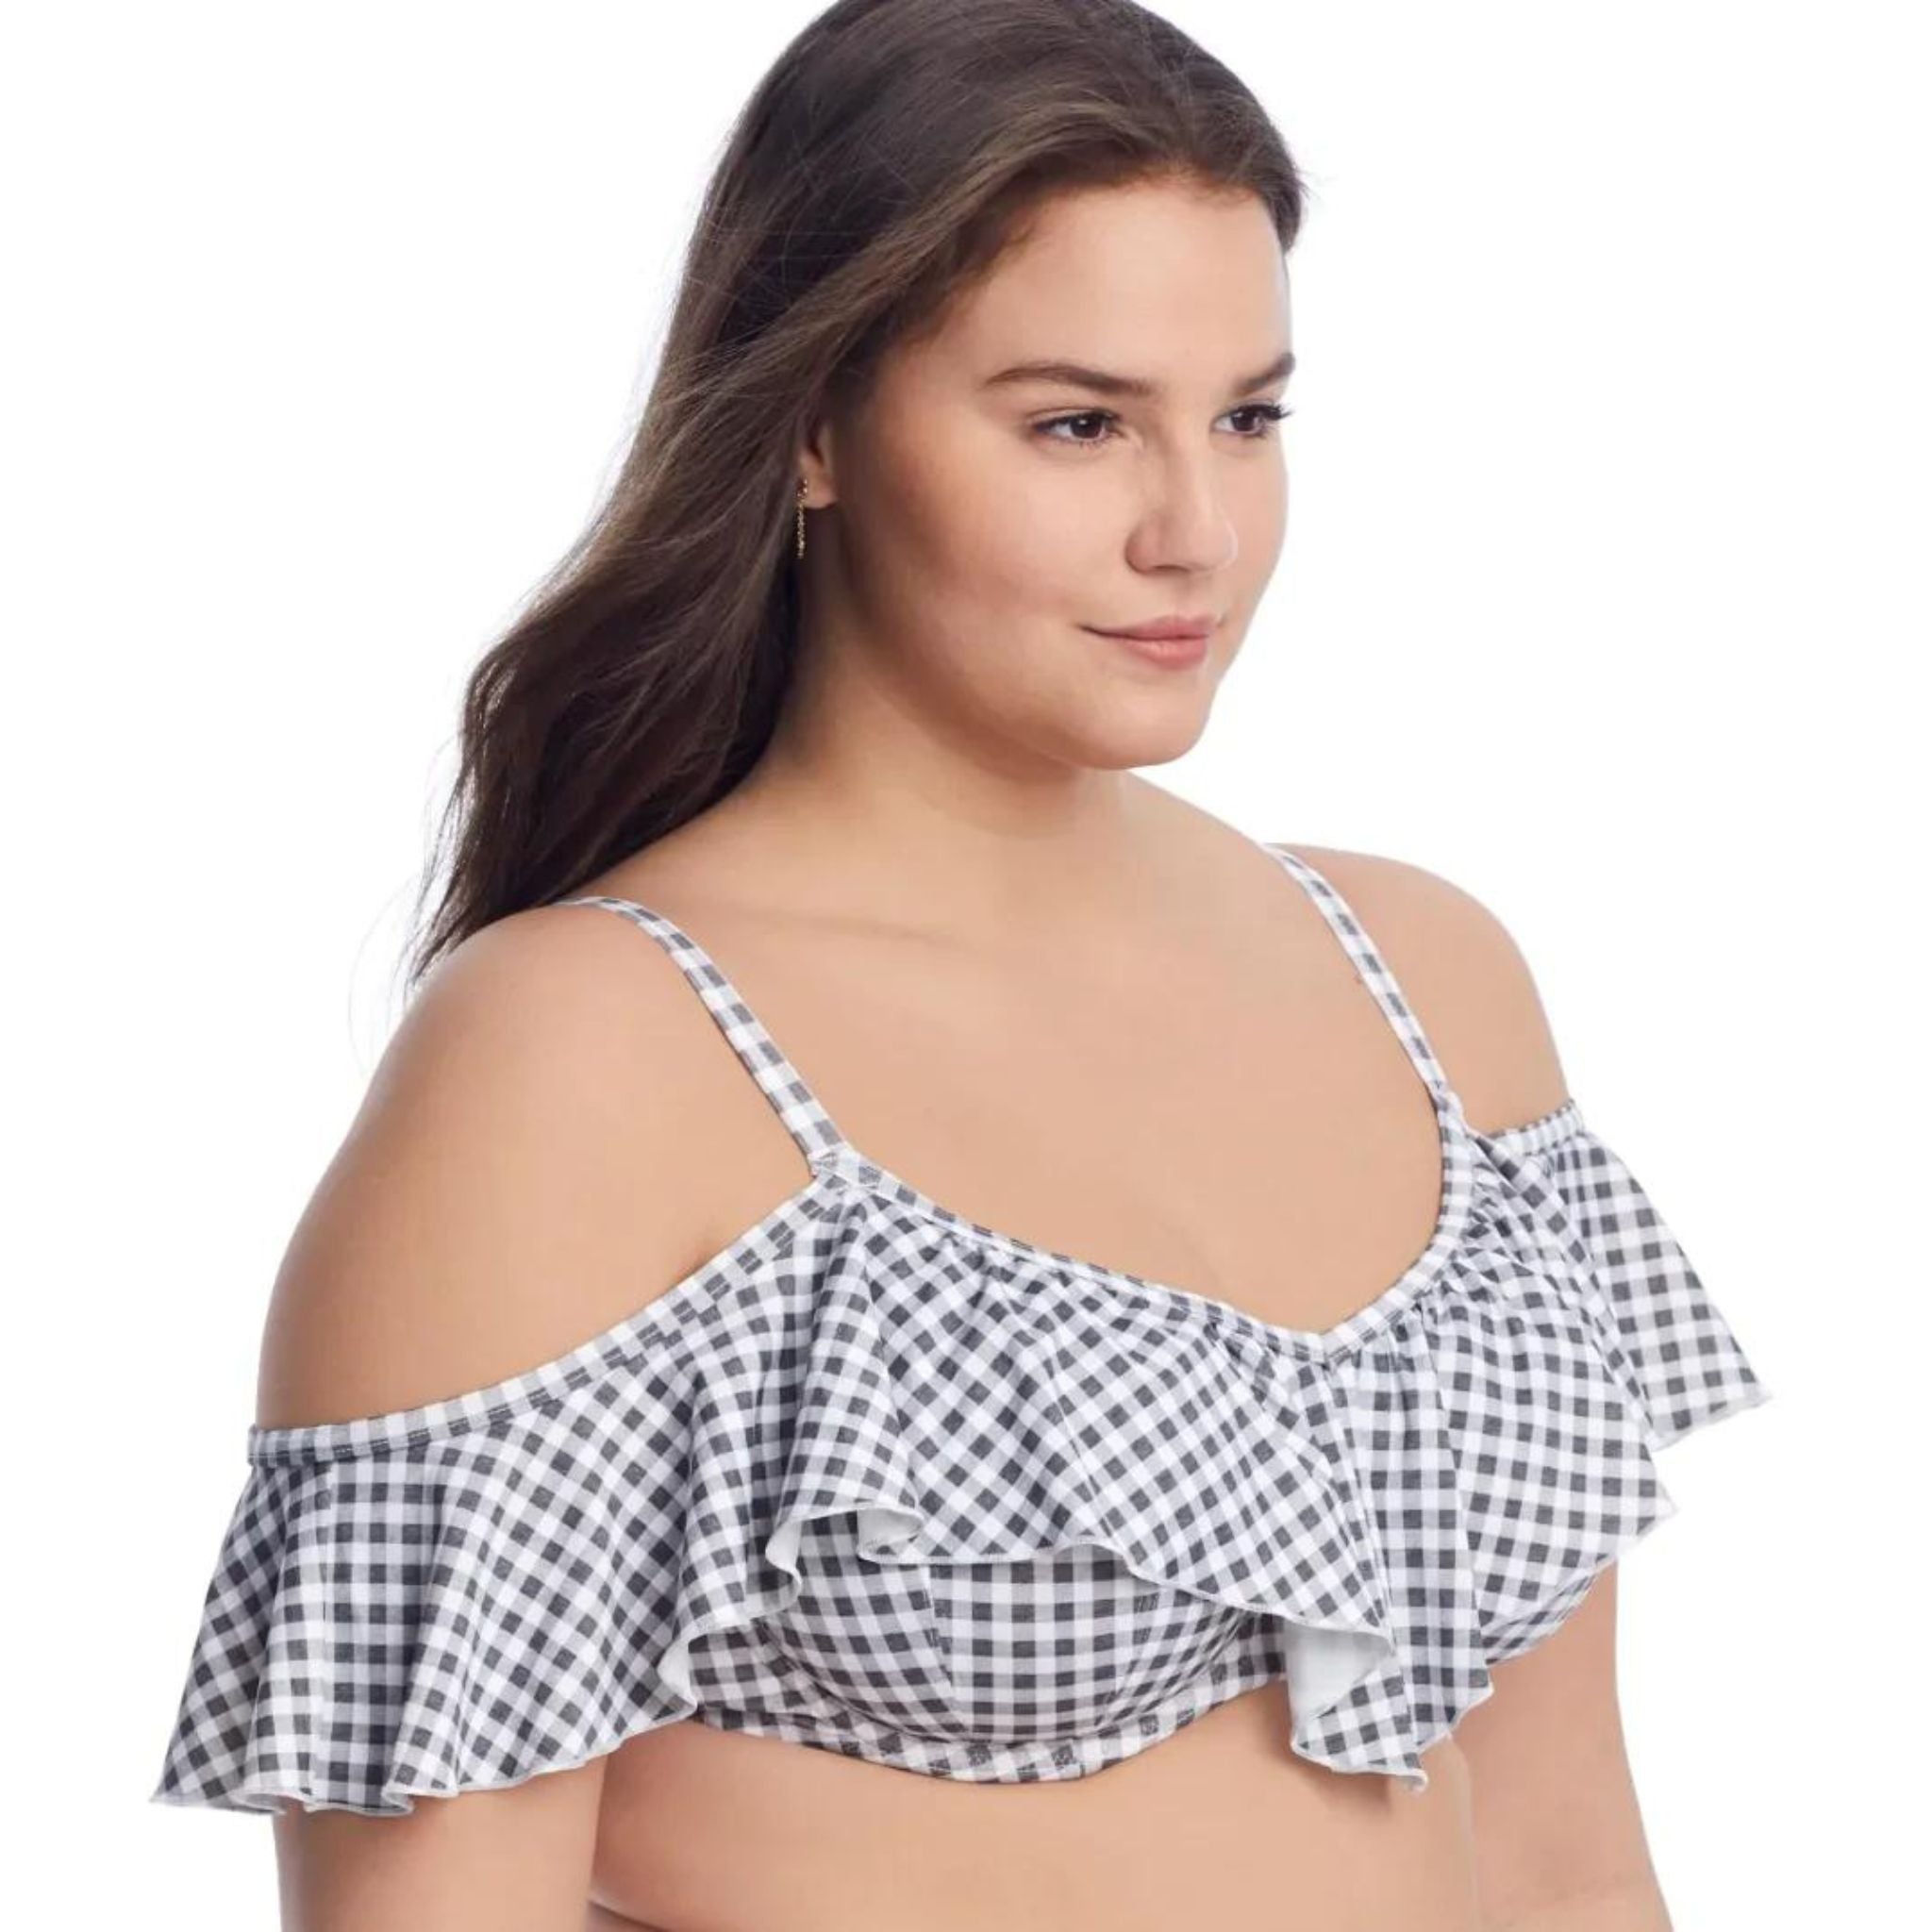 Elomi's Checkmate Bikini Top is at the top of the must-have swimwear list in a chic Grey Marl colourway, showcasing a contemporary retro gingham design with fully lined cups and powernet lining for additional support, finished with a flattering frill design which can be worn on or off the shoulders.